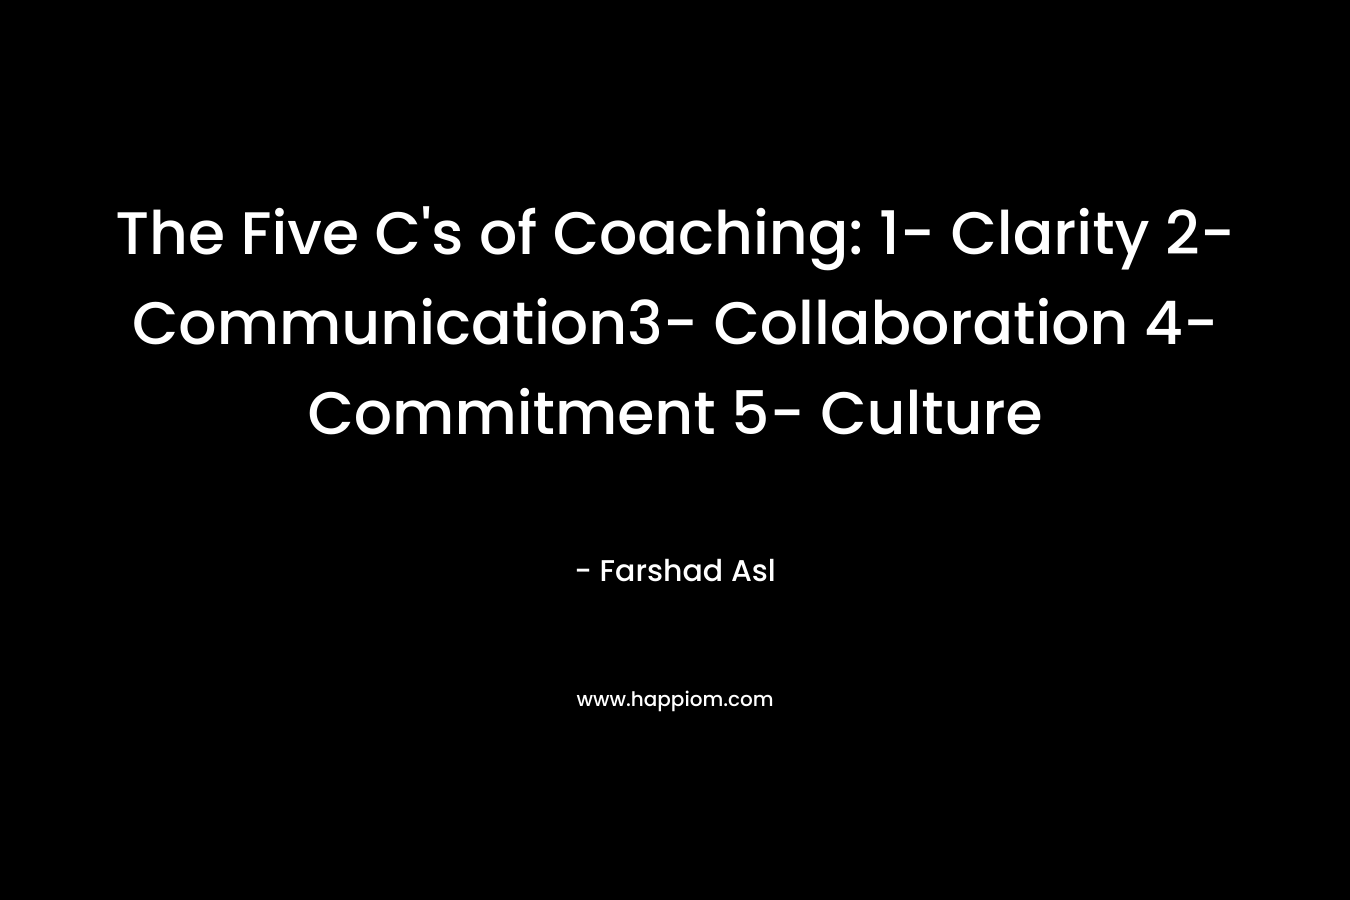 The Five C’s of Coaching: 1- Clarity 2- Communication3- Collaboration 4- Commitment 5- Culture – Farshad Asl